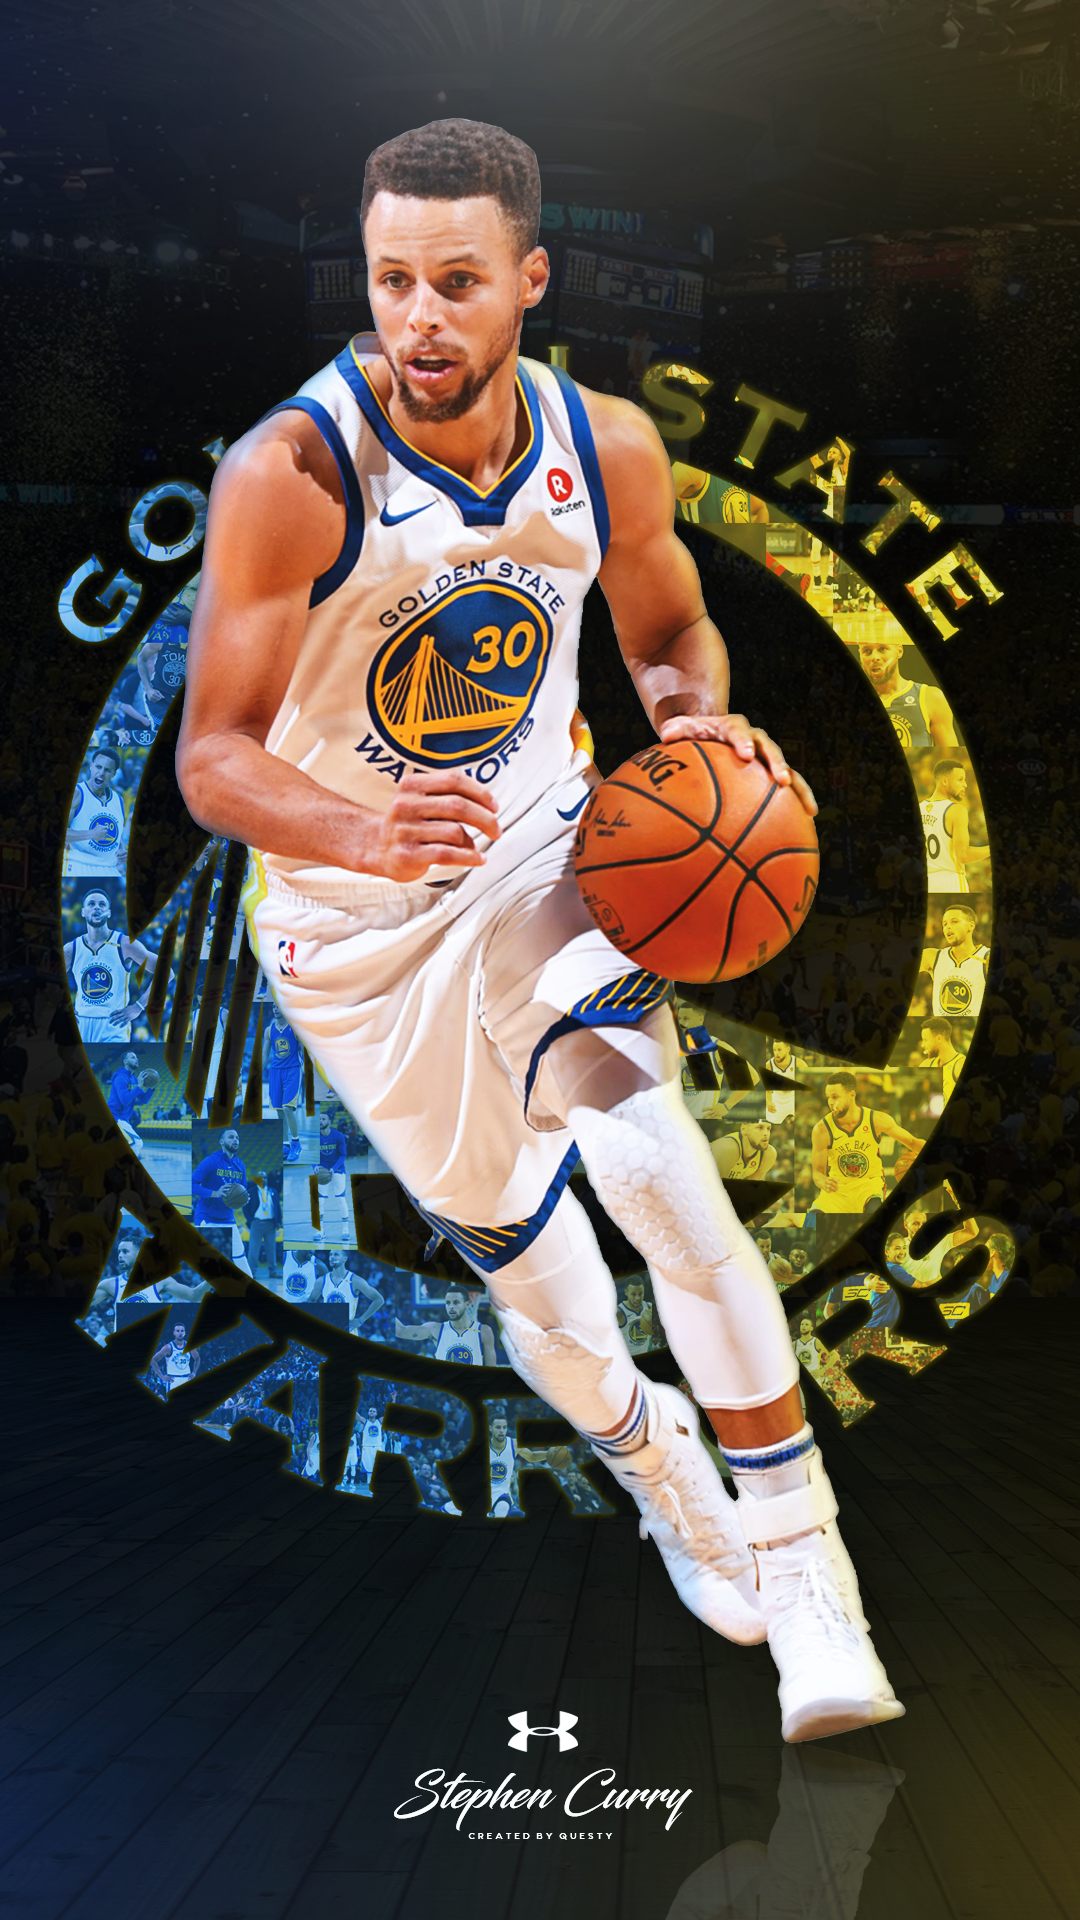 Stephen Curry Wallpaper 1080p Hupages Download iPhone Wallpaper. Nba stephen curry, Stephen curry wallpaper, Stephen curry wallpaper hd